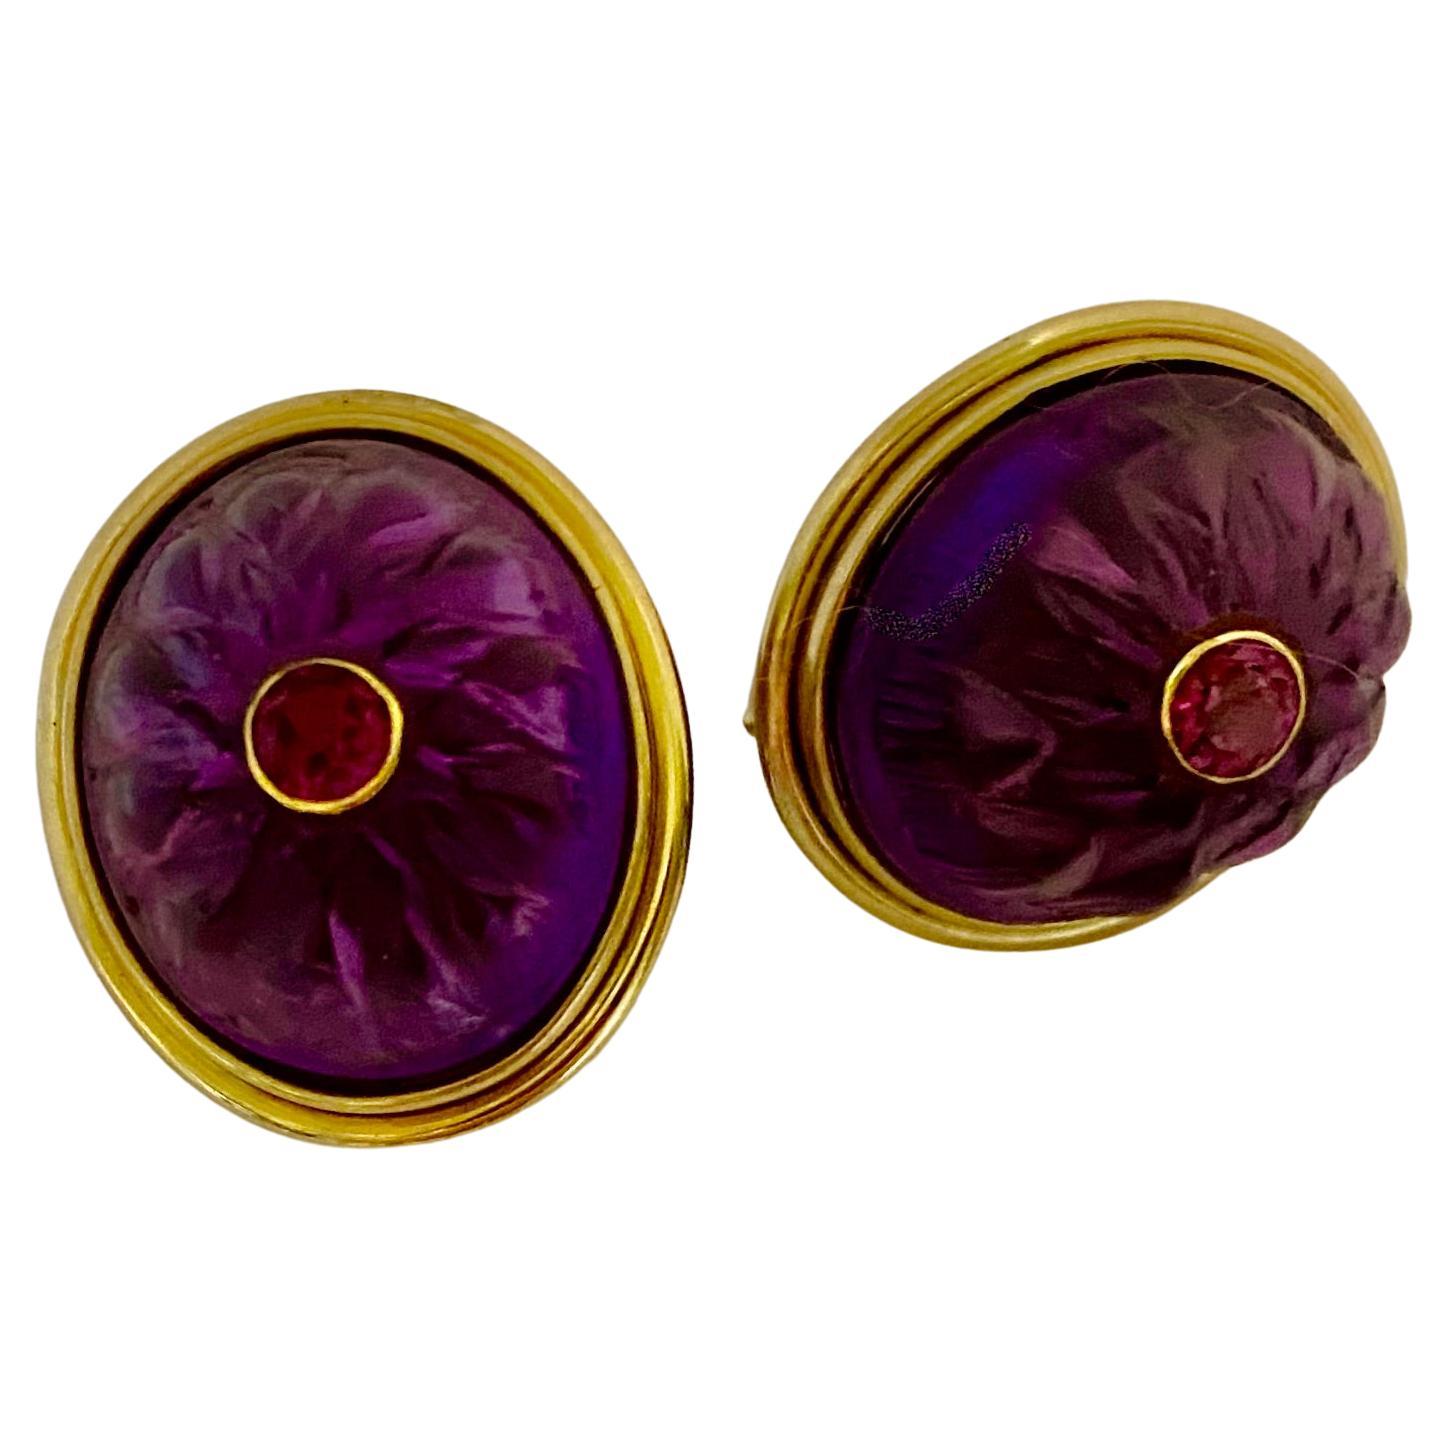 Cabochon amethyst carved in the form of stylized lotus blooms are features in these elegant button earrings.  The richly colored amethyst cabs (origin: Brazil) were carved in Indonesia.  Set within the carvings are bezel set and brilliant cut